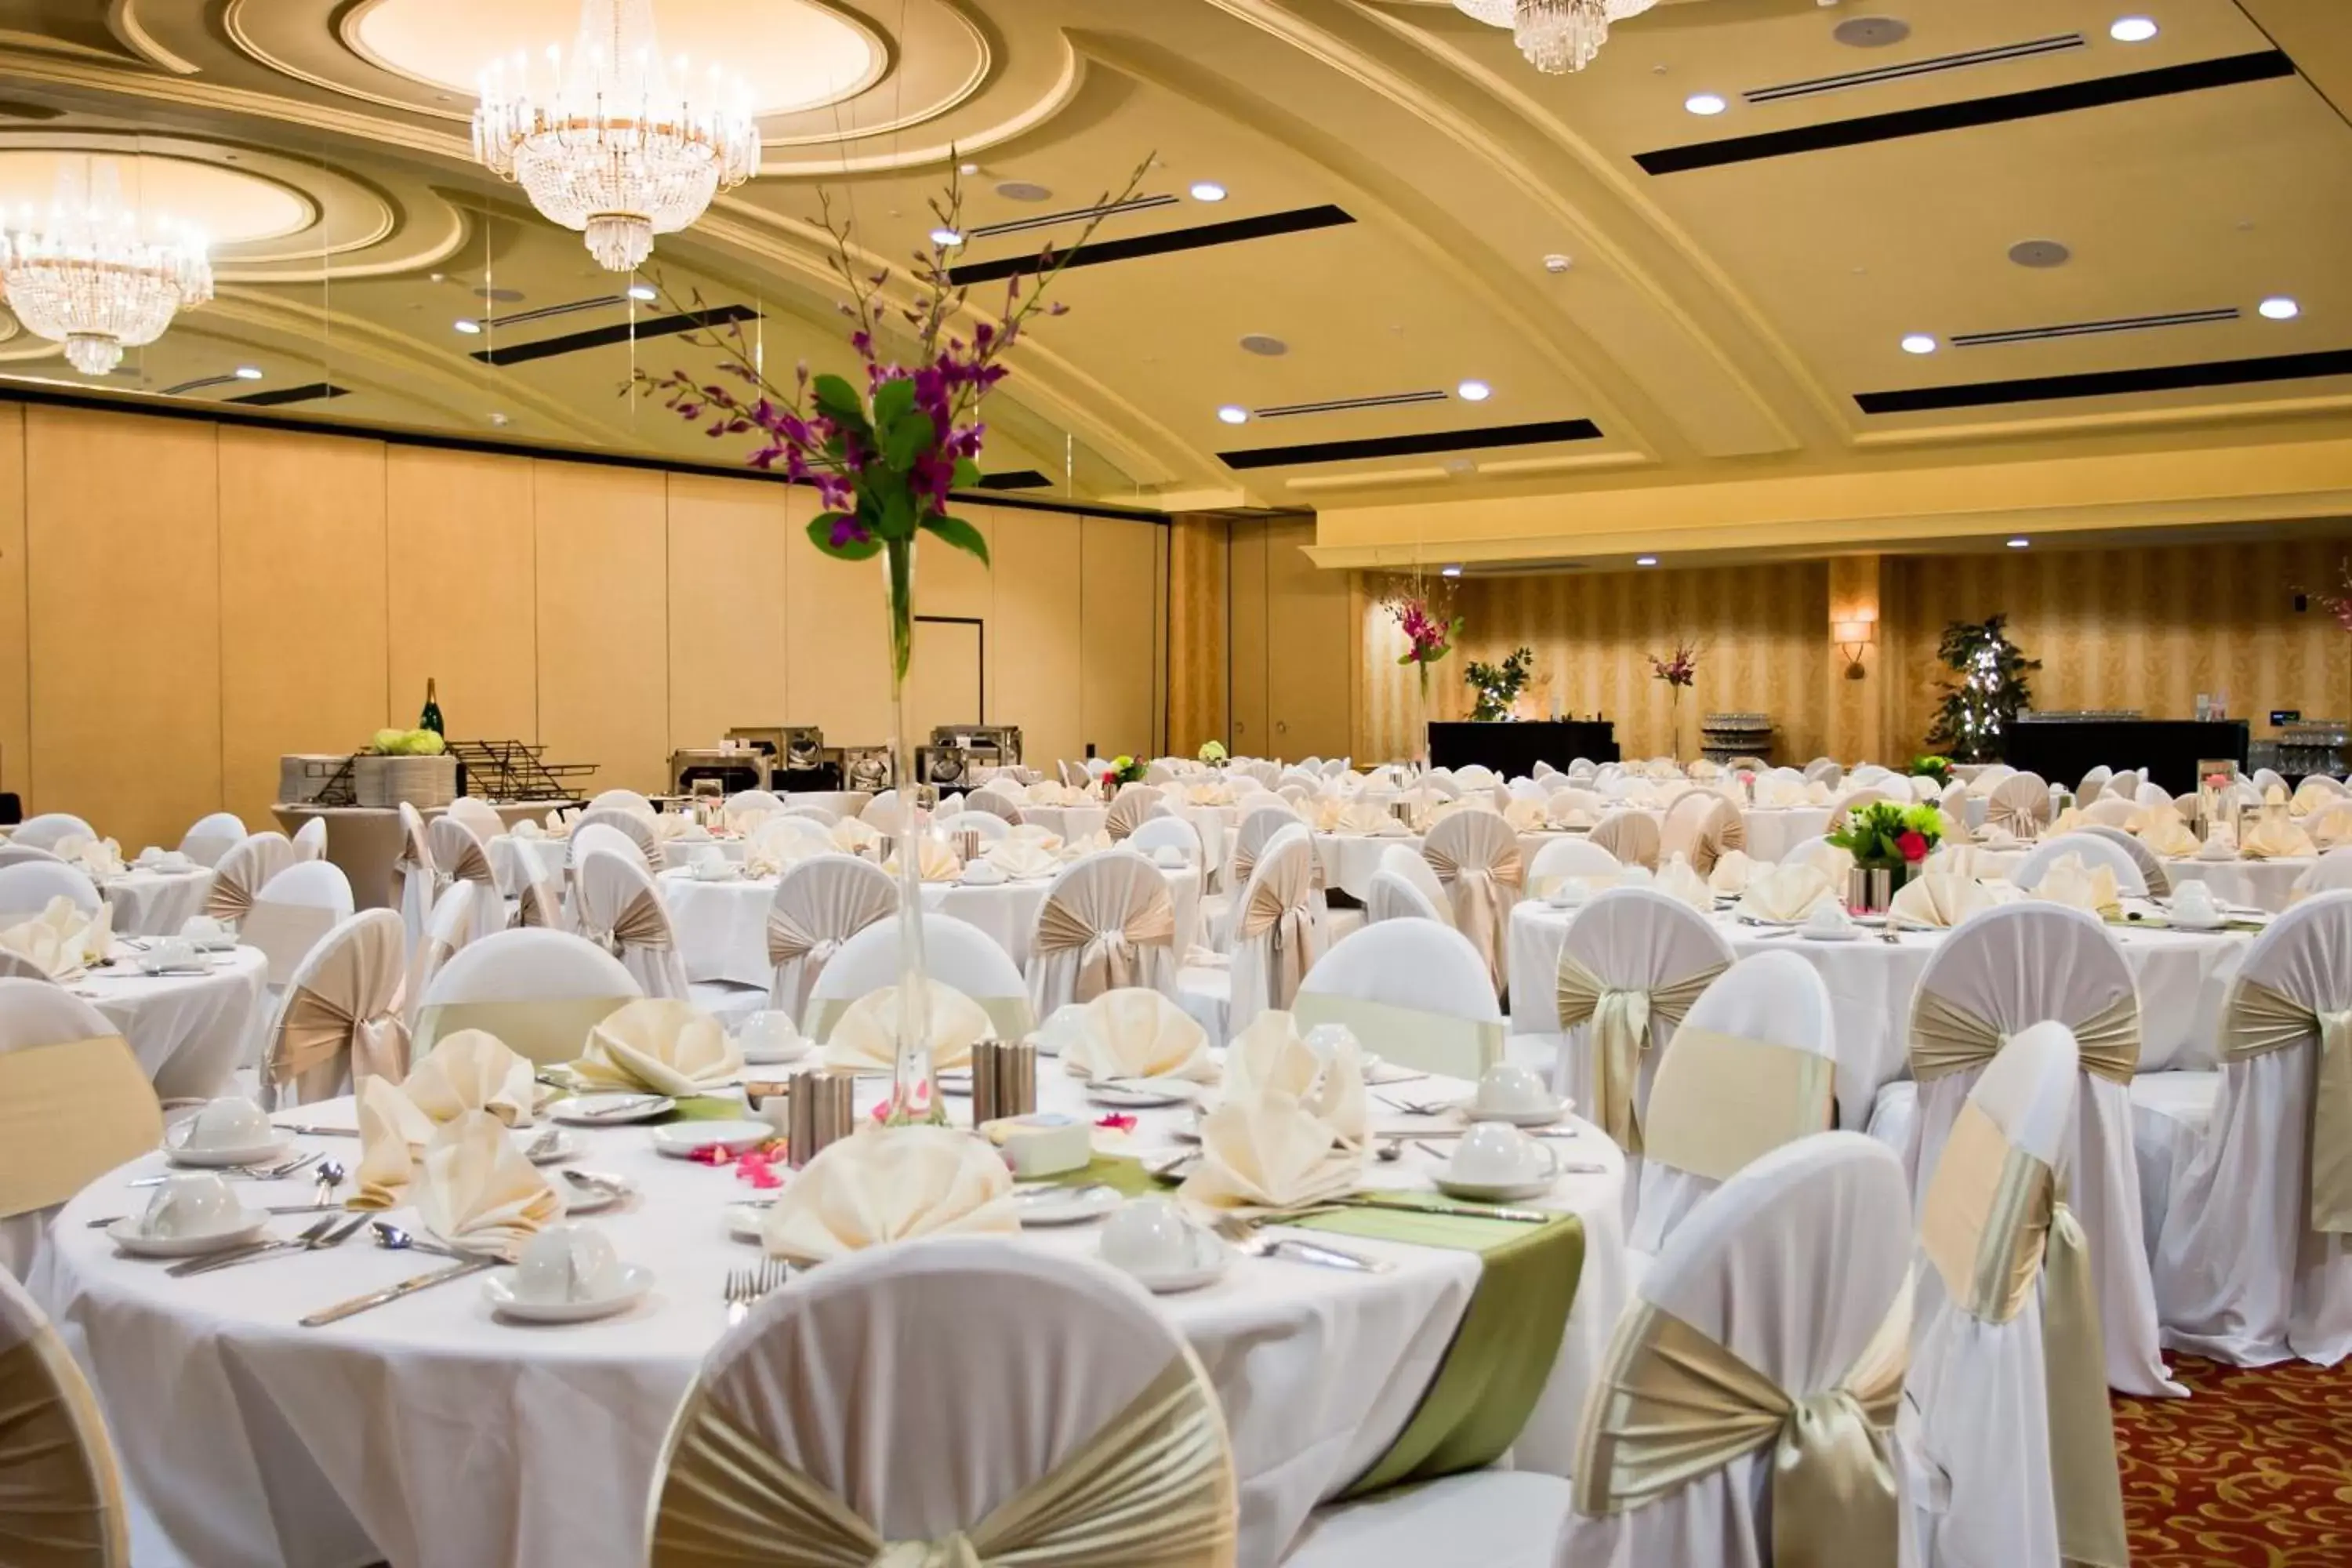 Banquet/Function facilities, Banquet Facilities in Crowne Plaza Louisville Airport Expo Center, an IHG Hotel